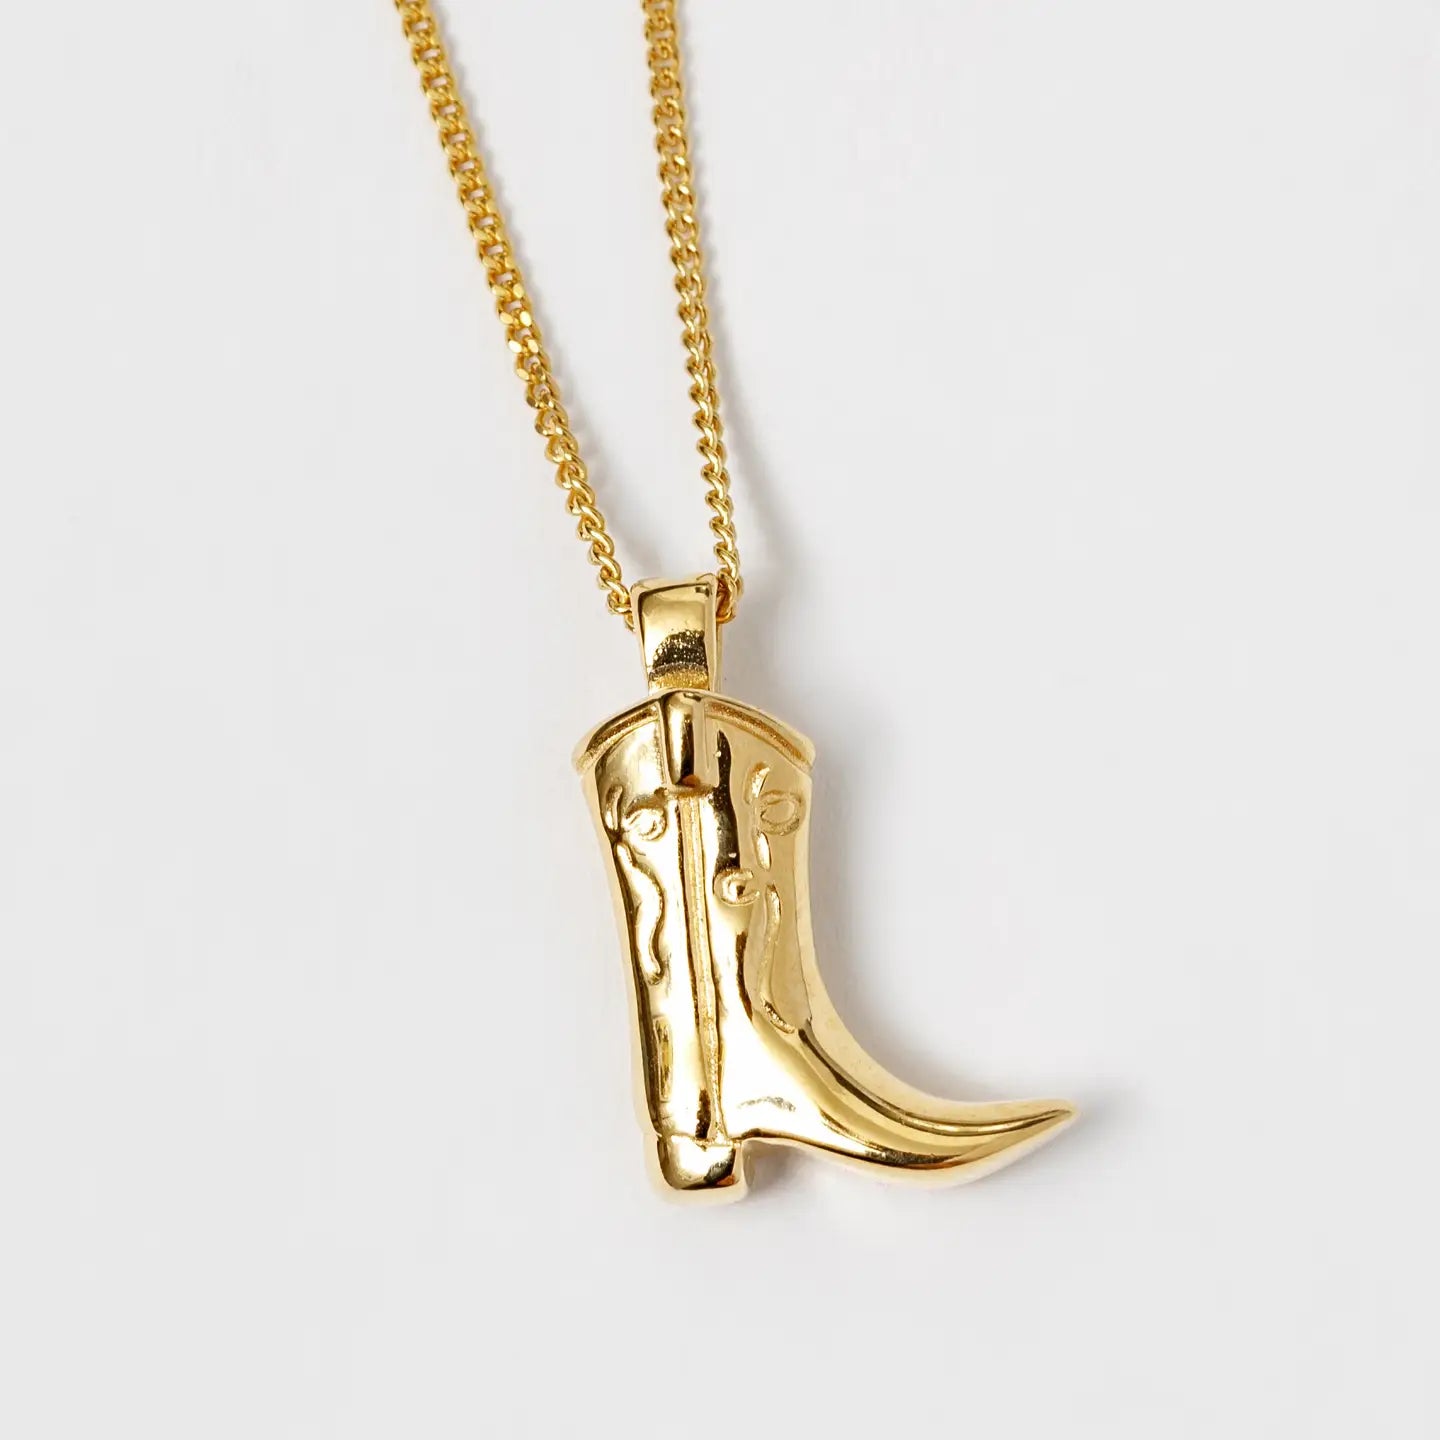 Cowboy Boot Charm Necklace in Gold